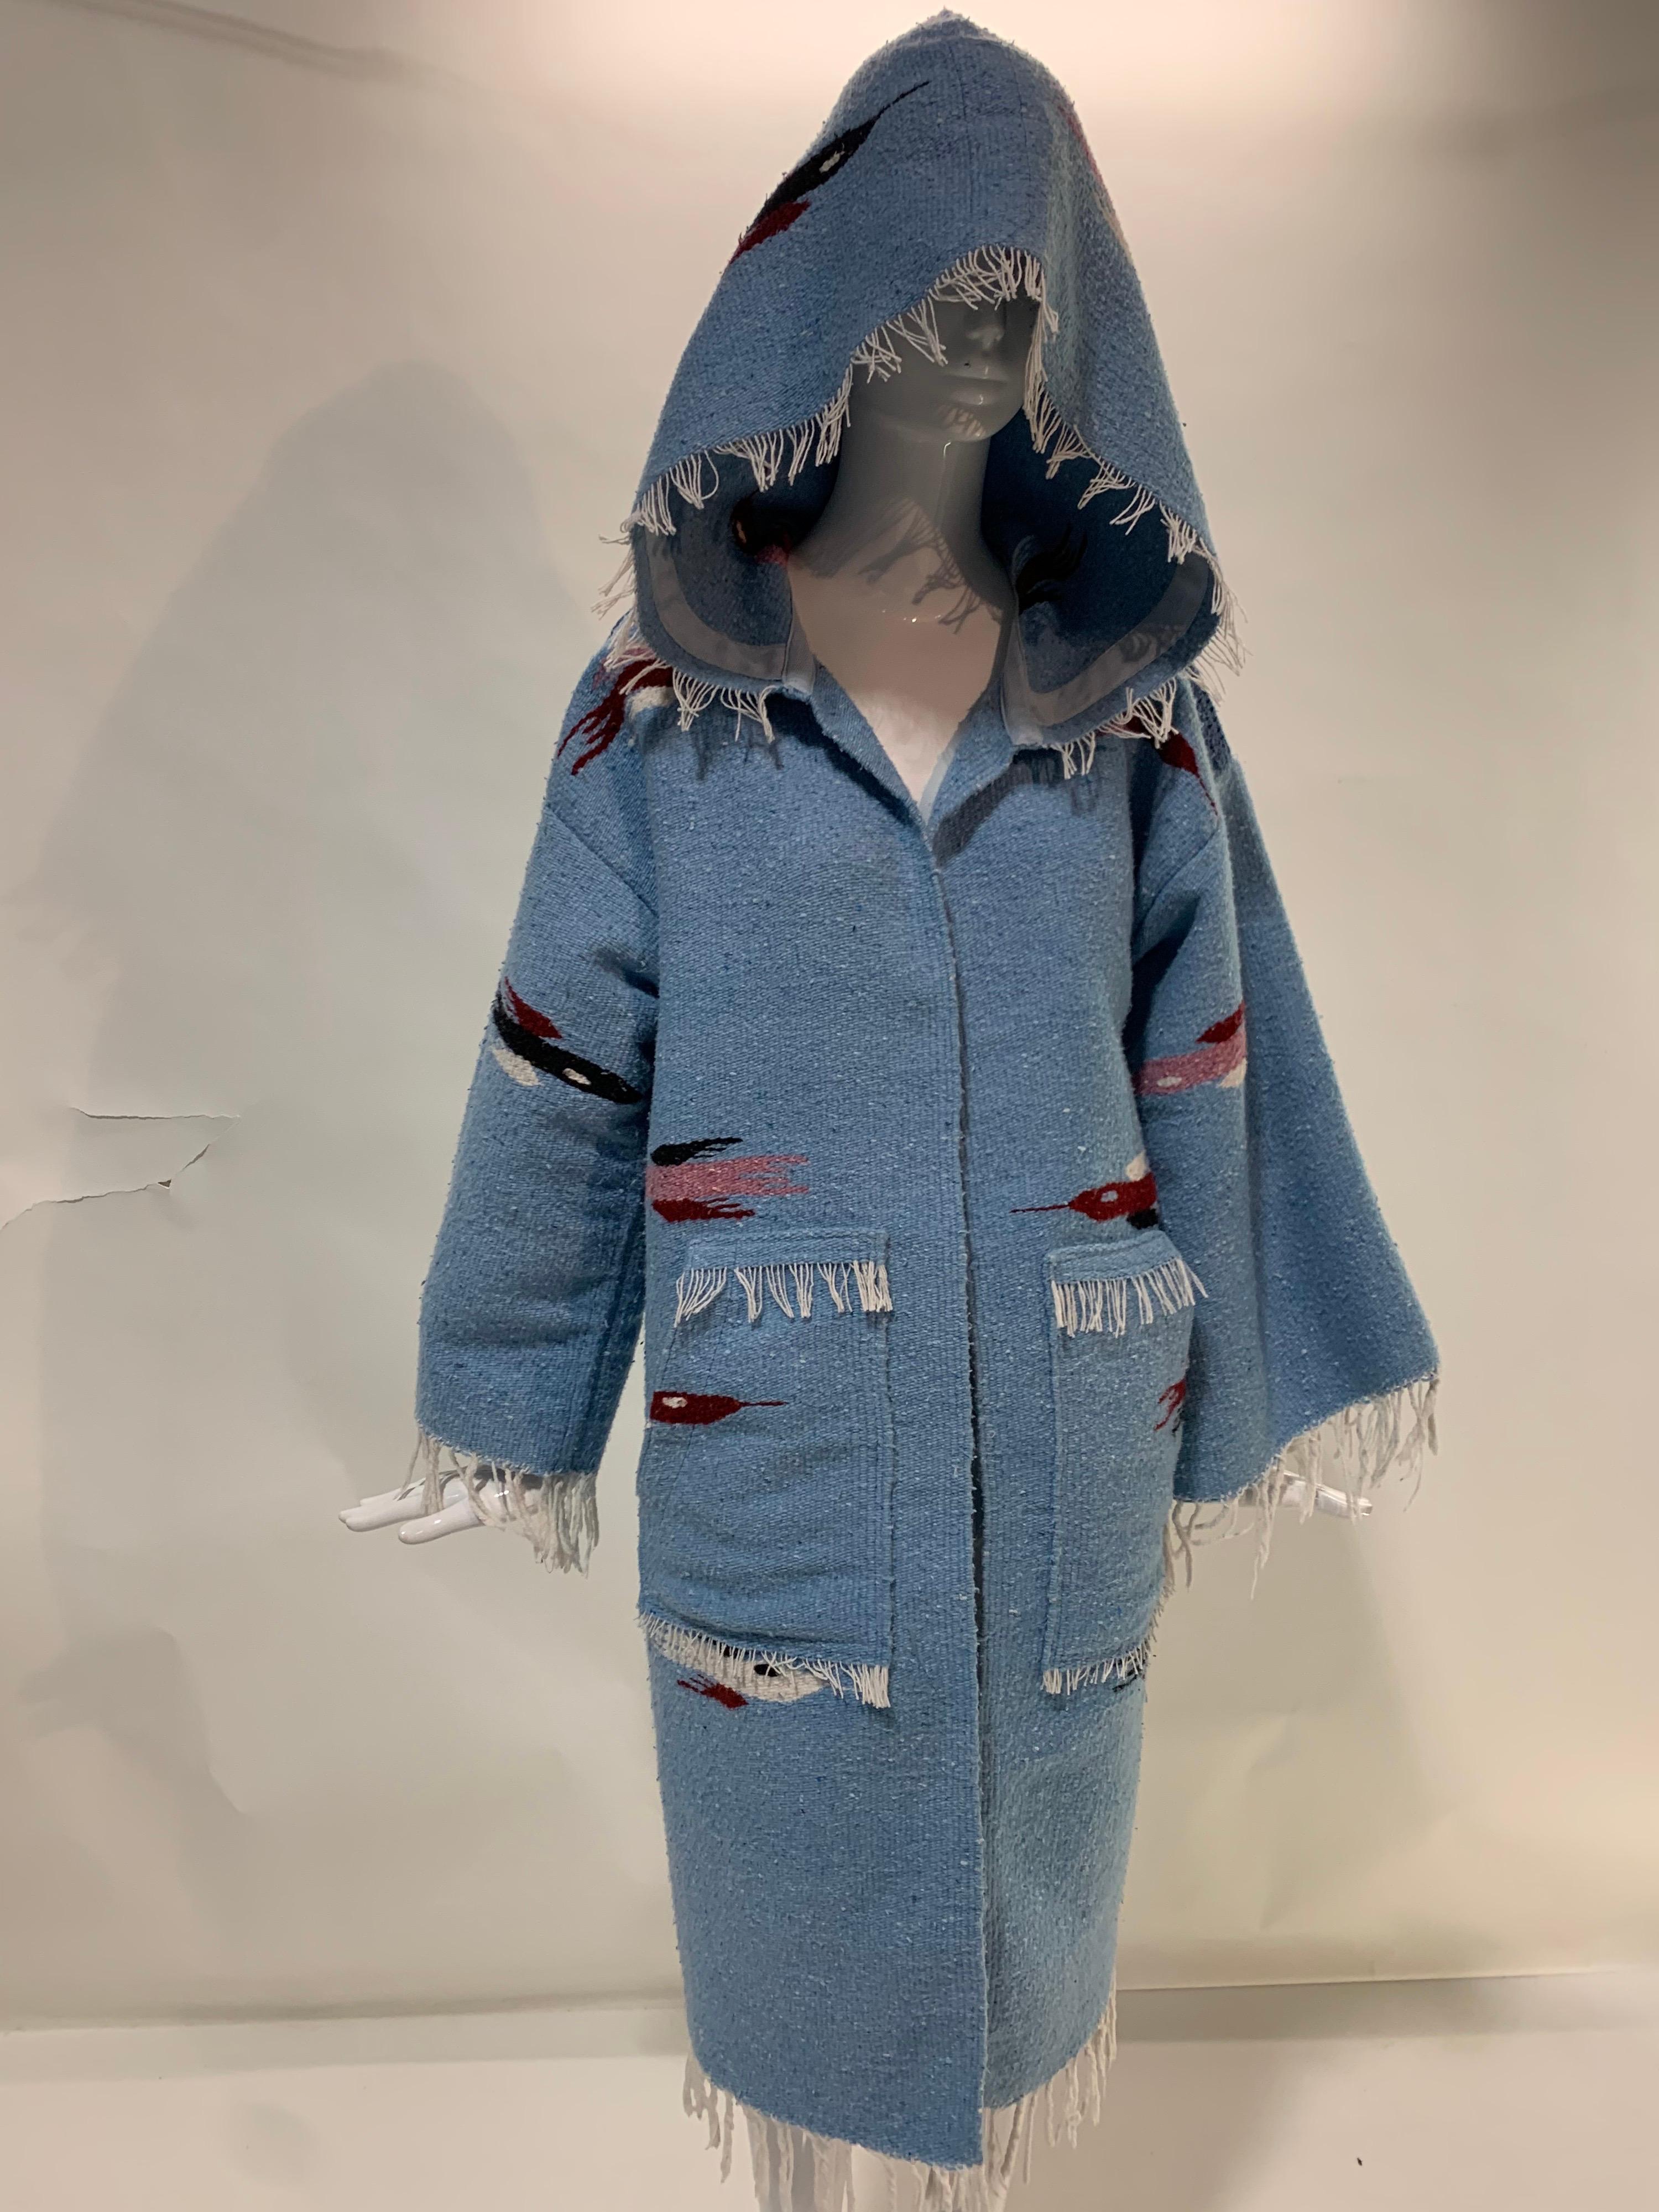 Torso Creations Southwest-style hand-wove blanket coat in pale blue with stylized roadrunner bird motif. Large hood, patch pockets and fringed edges. Size Large. Part of our Spring/Summer 2022 Collection. 